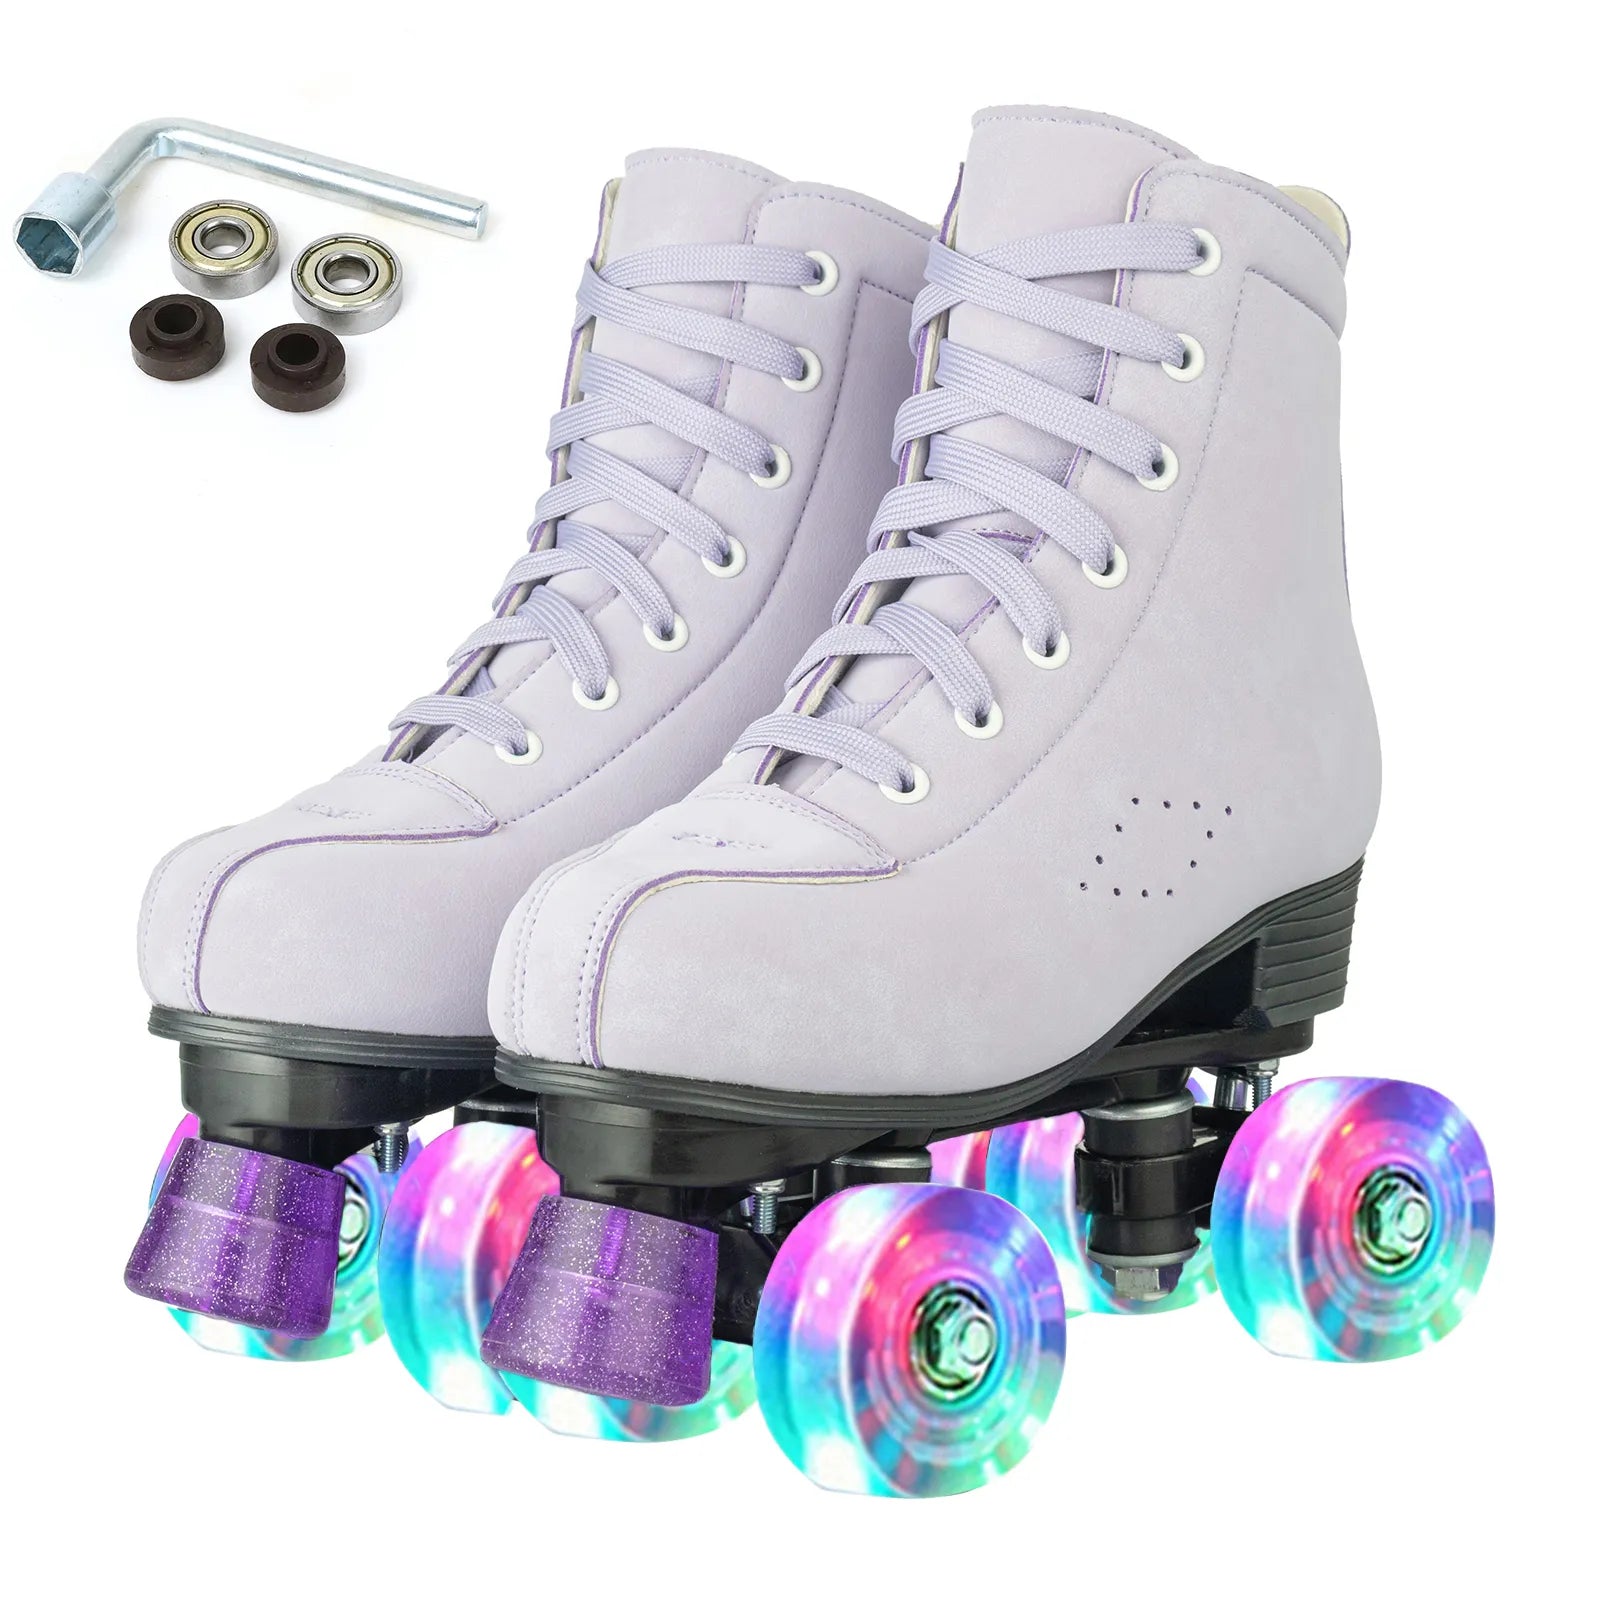 4 Wheels PU Leather Skating Shoes